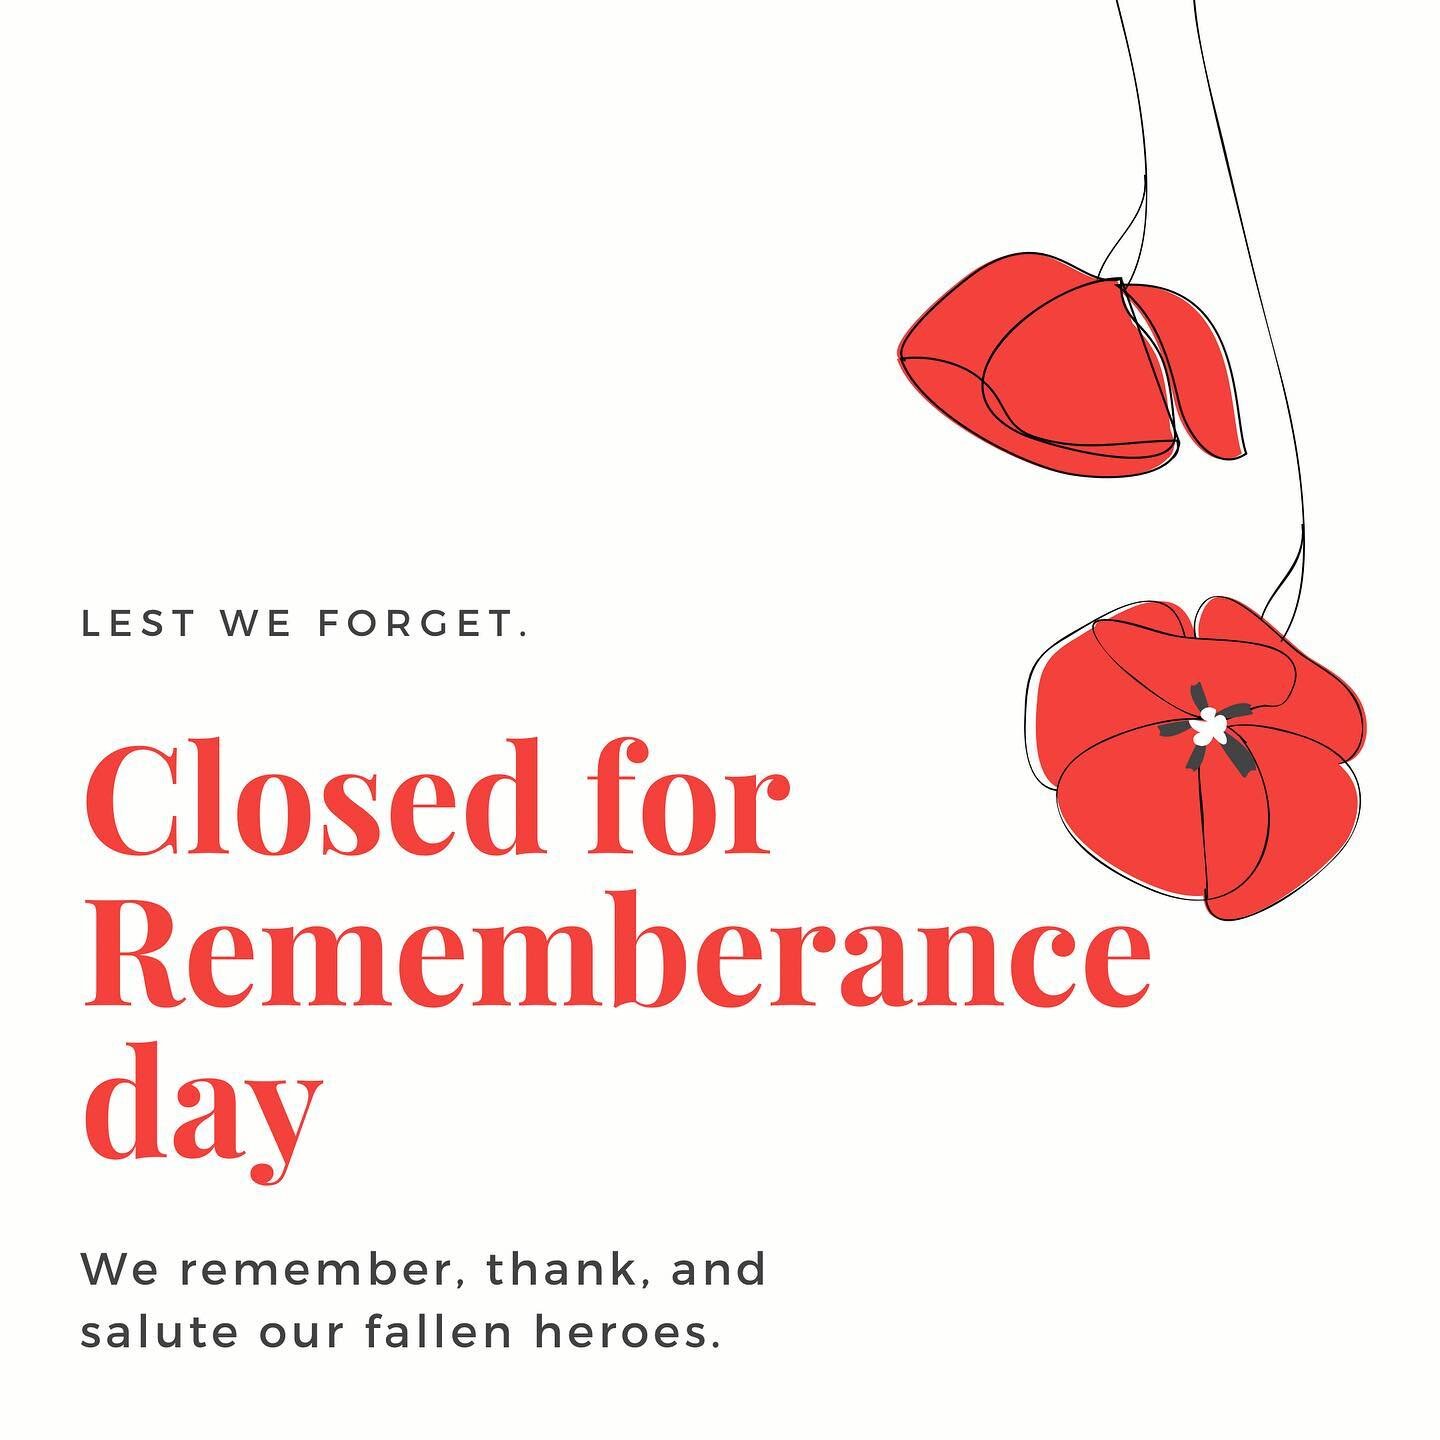 We will be closed tomorrow Thursday November 11 for Rememberance day.